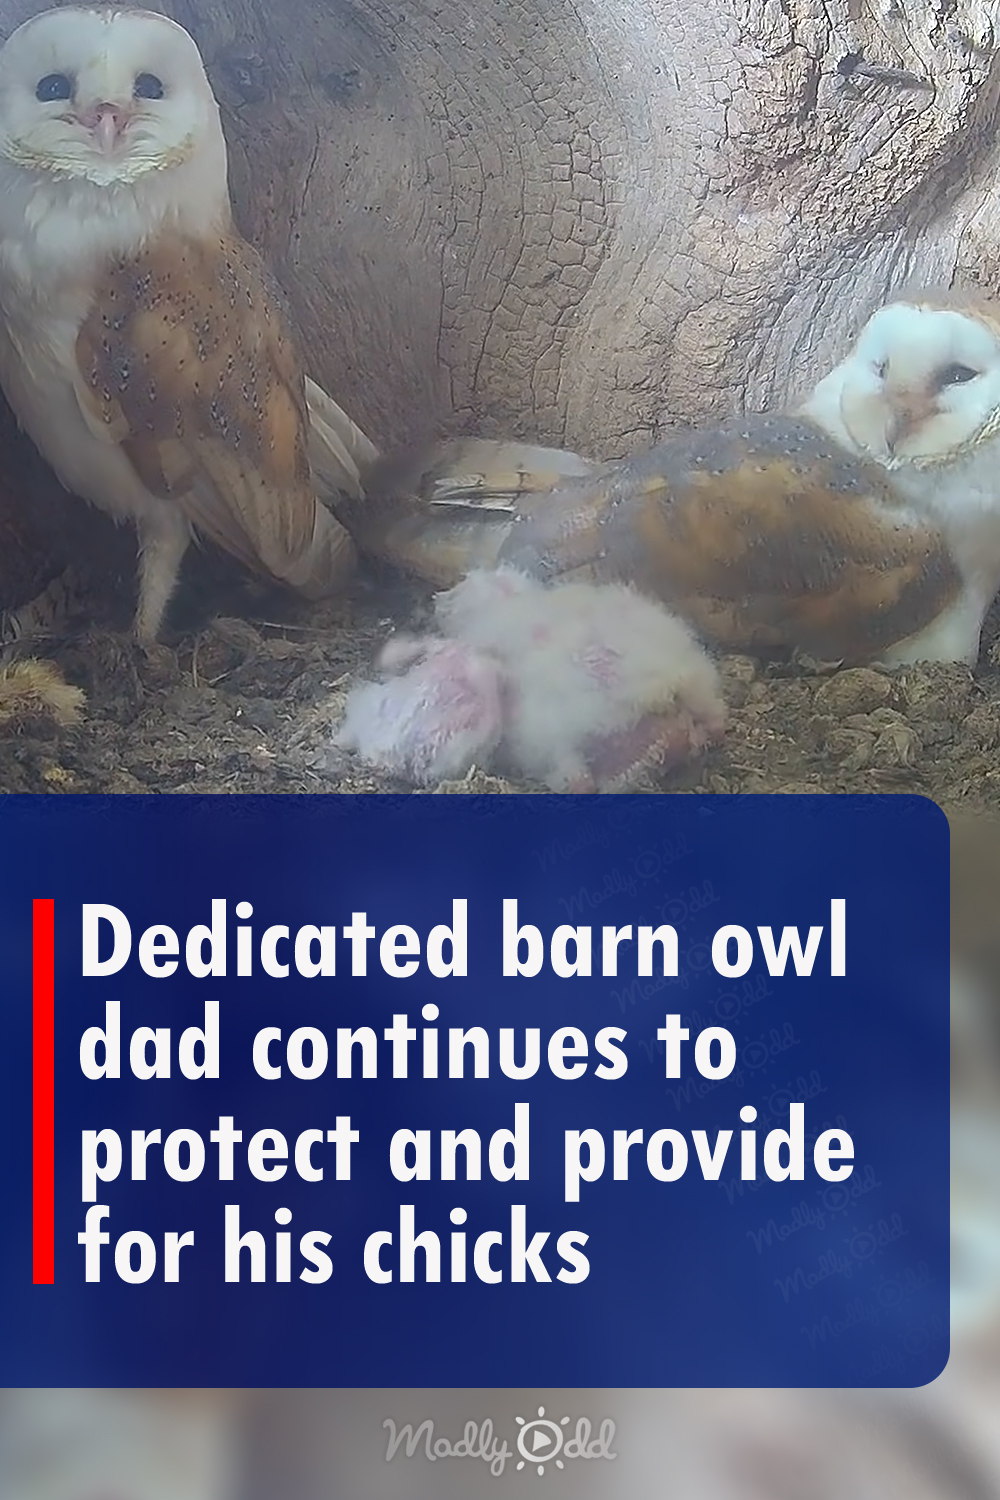 Dedicated barn owl dad continues to protect and provide for his chicks